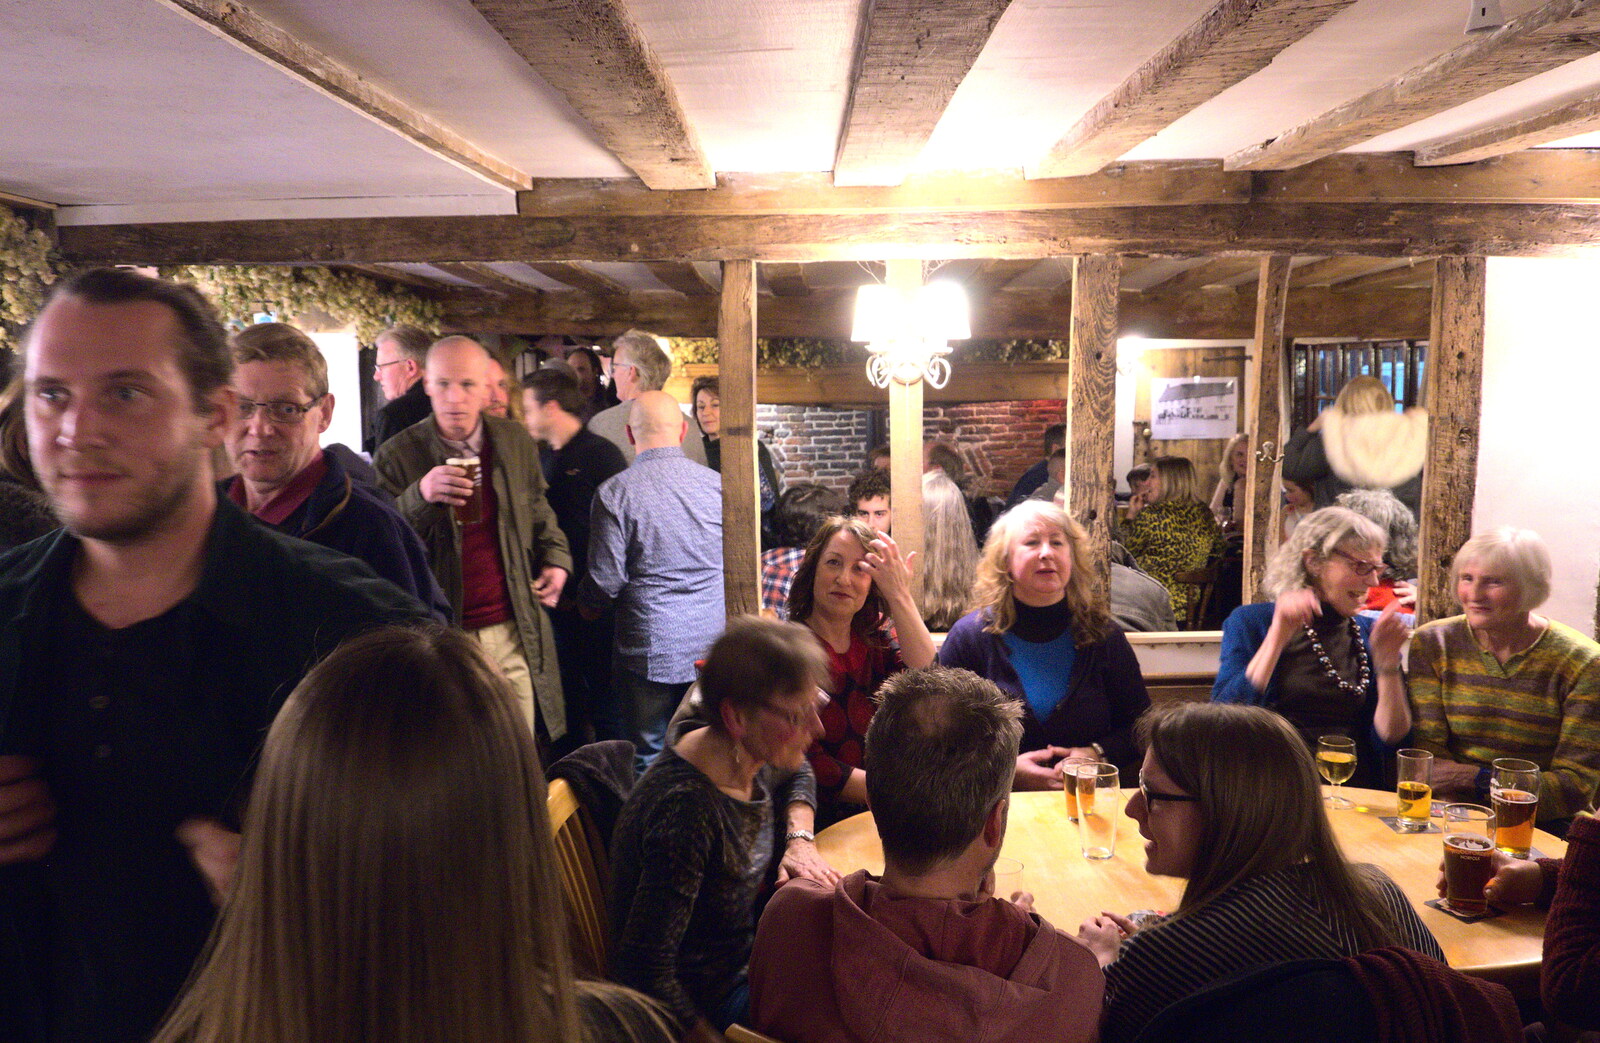 Nice to see that the Fox is packed from A Night at the Fox Inn, Garboldisham, Norfolk - 9th February 2019